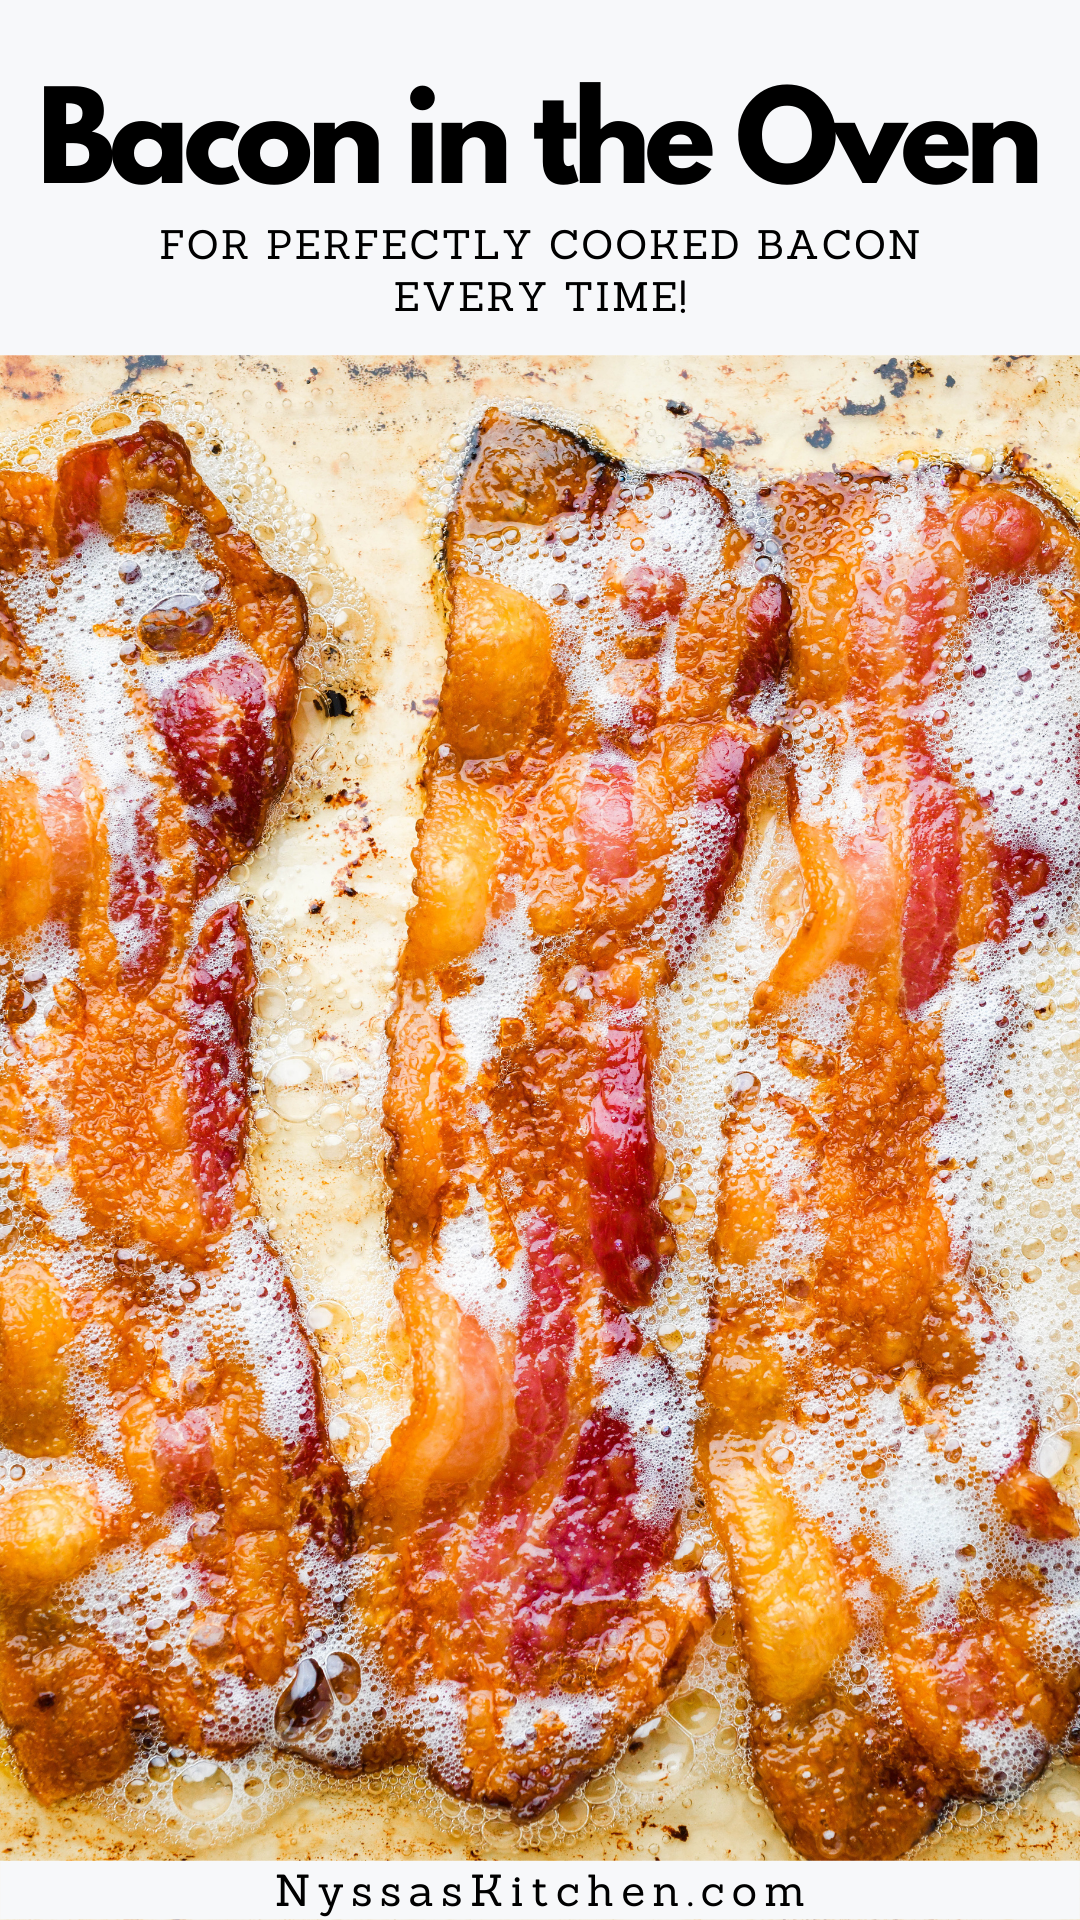 Cooking bacon in the oven is the KEY to easy, perfectly cooked bacon every time! Especially when cooking a big batch of bacon or making breakfast for a crowd. An easy method with less mess so you can cook smarter not harder! Gluten free, keto, Whole30 option.